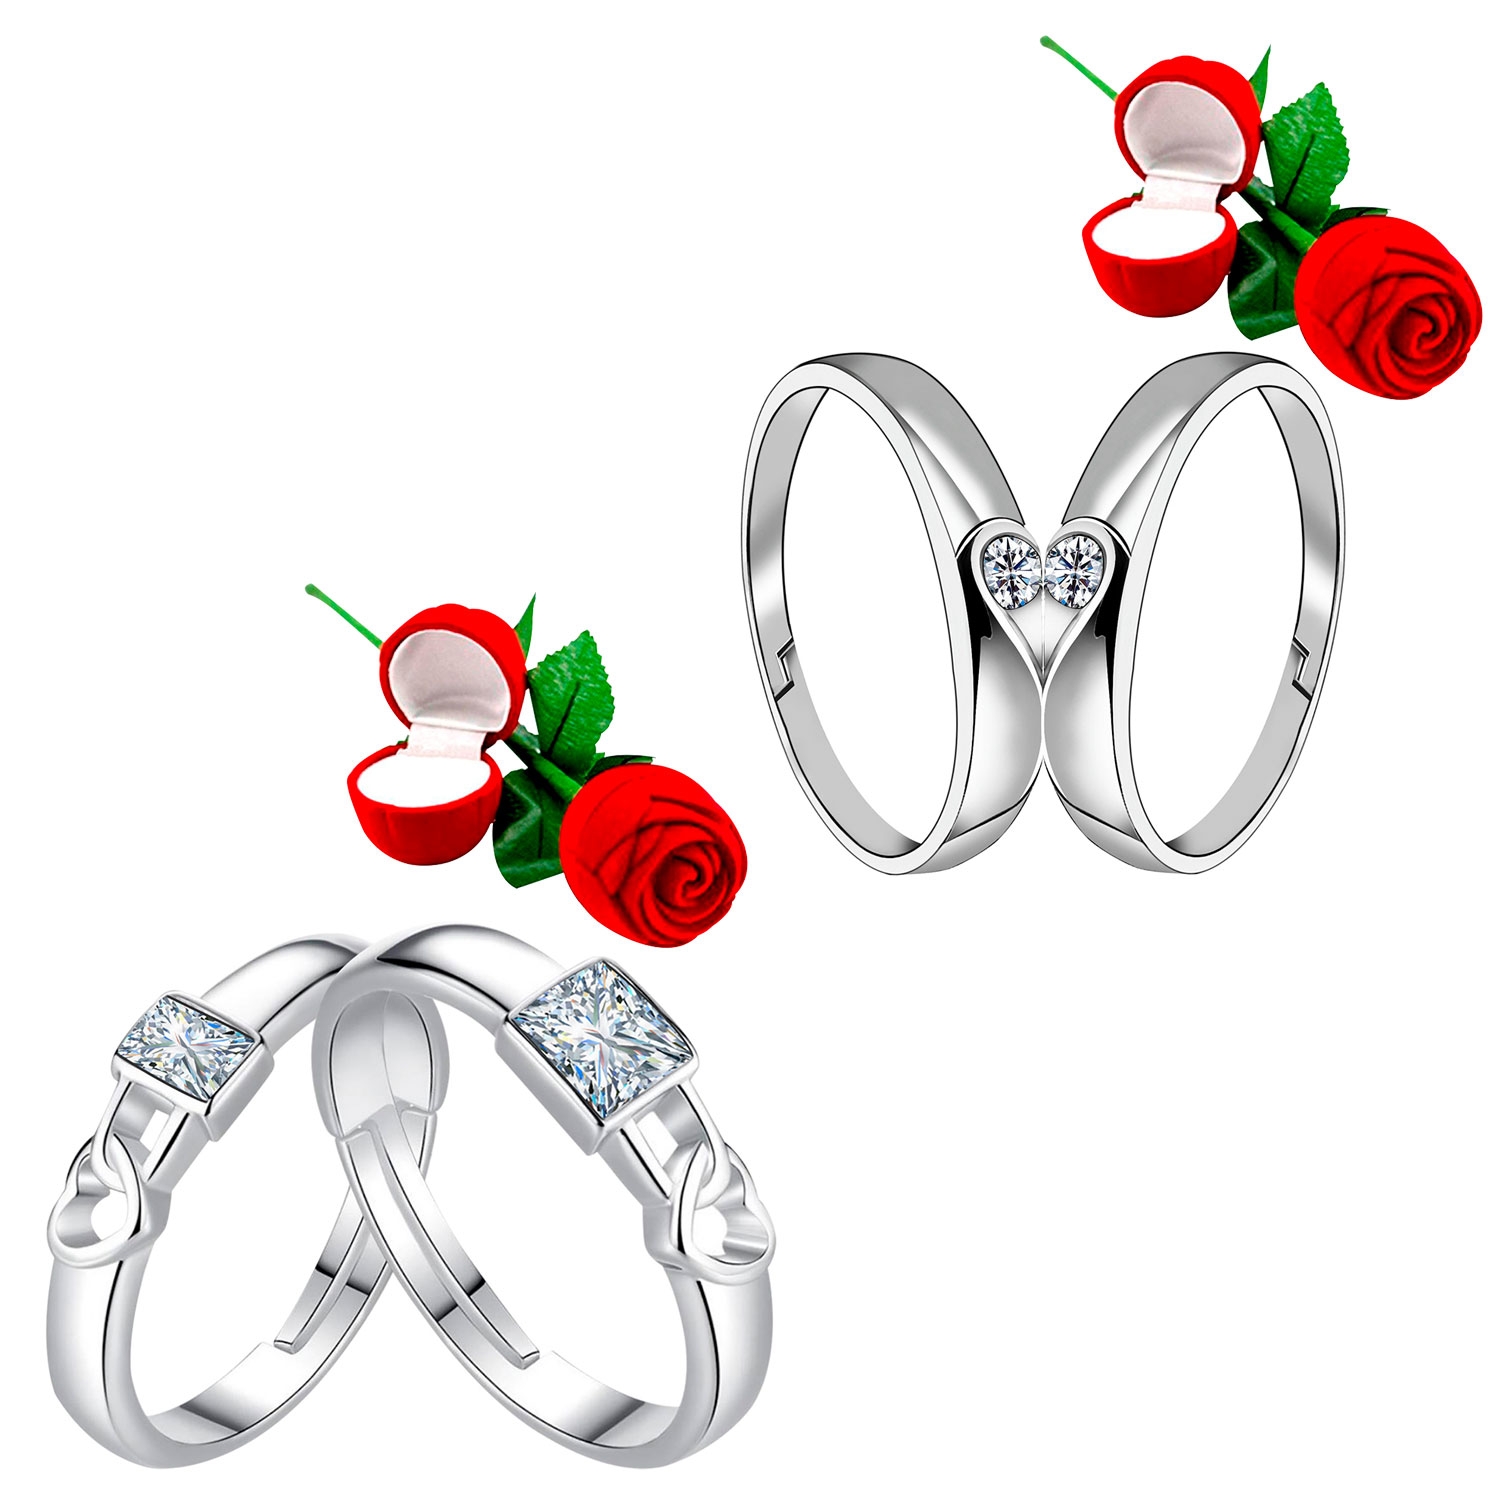 SILVER SHINE |  Designer Adjustable Couple Rings Set for lovers Silver Plated with 2 Piece Red Rose Gift Box Stylish Ring for Men and Women 